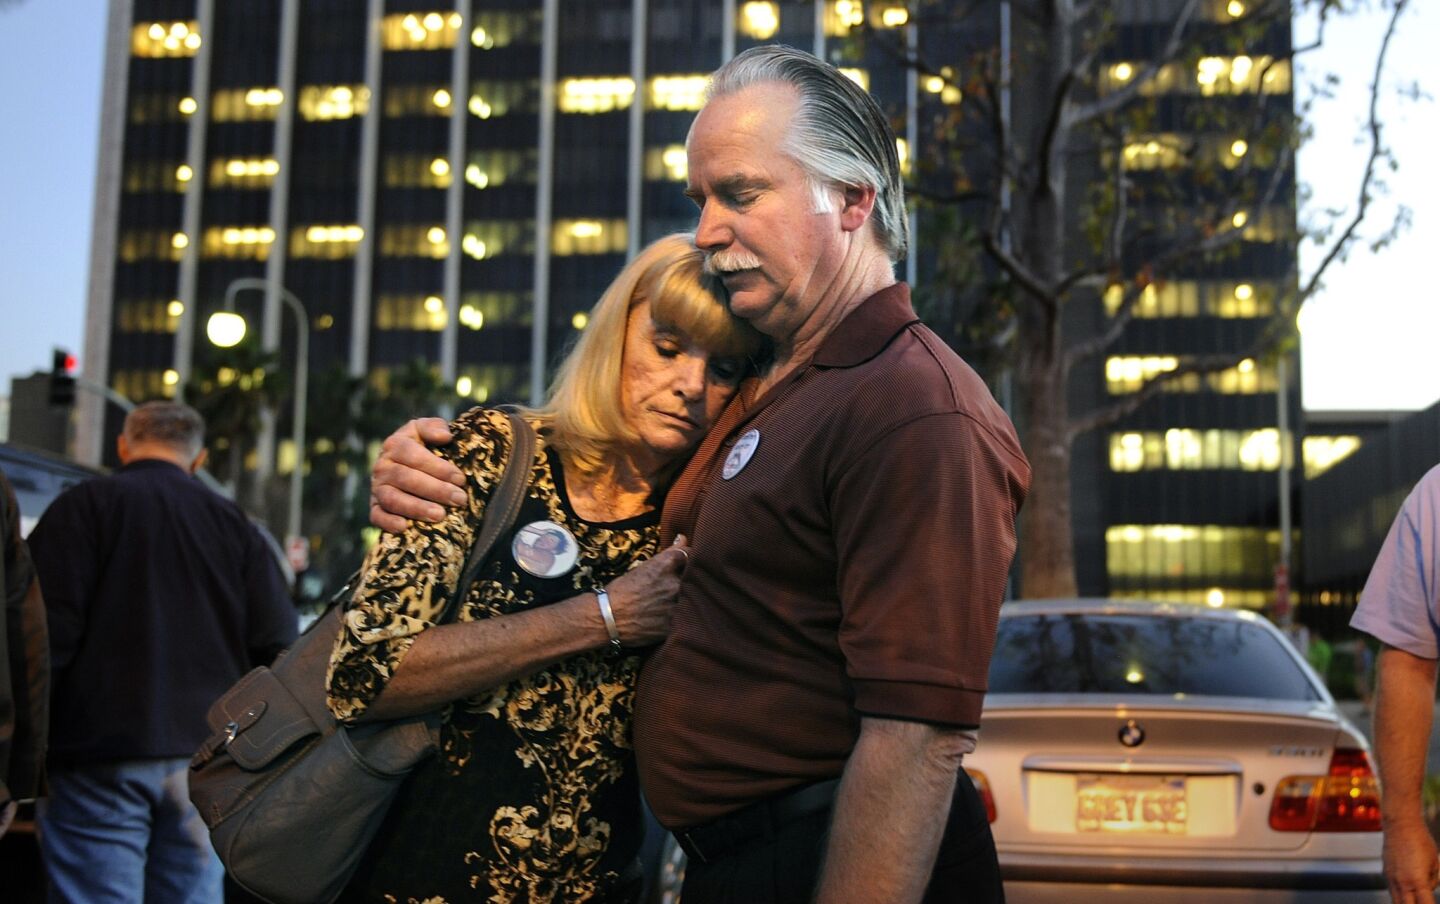 Ron and Kathy Thomas embrace outside the Santa Ana Courthouse Monday after two Fullerton police officers were found not guilty in the murder of their son Kelly.